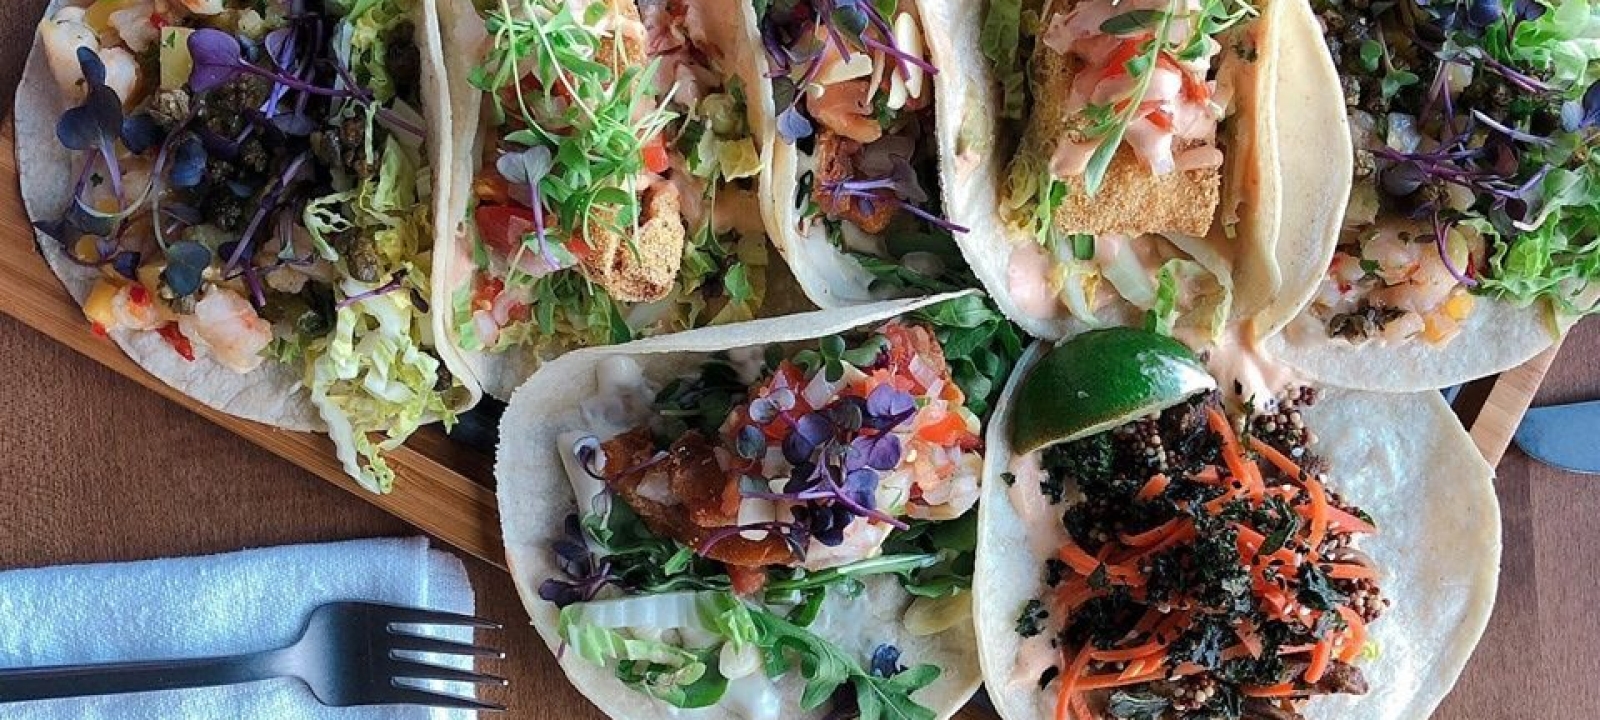 Quest for the Best: Spots in Saskatoon to get tacos